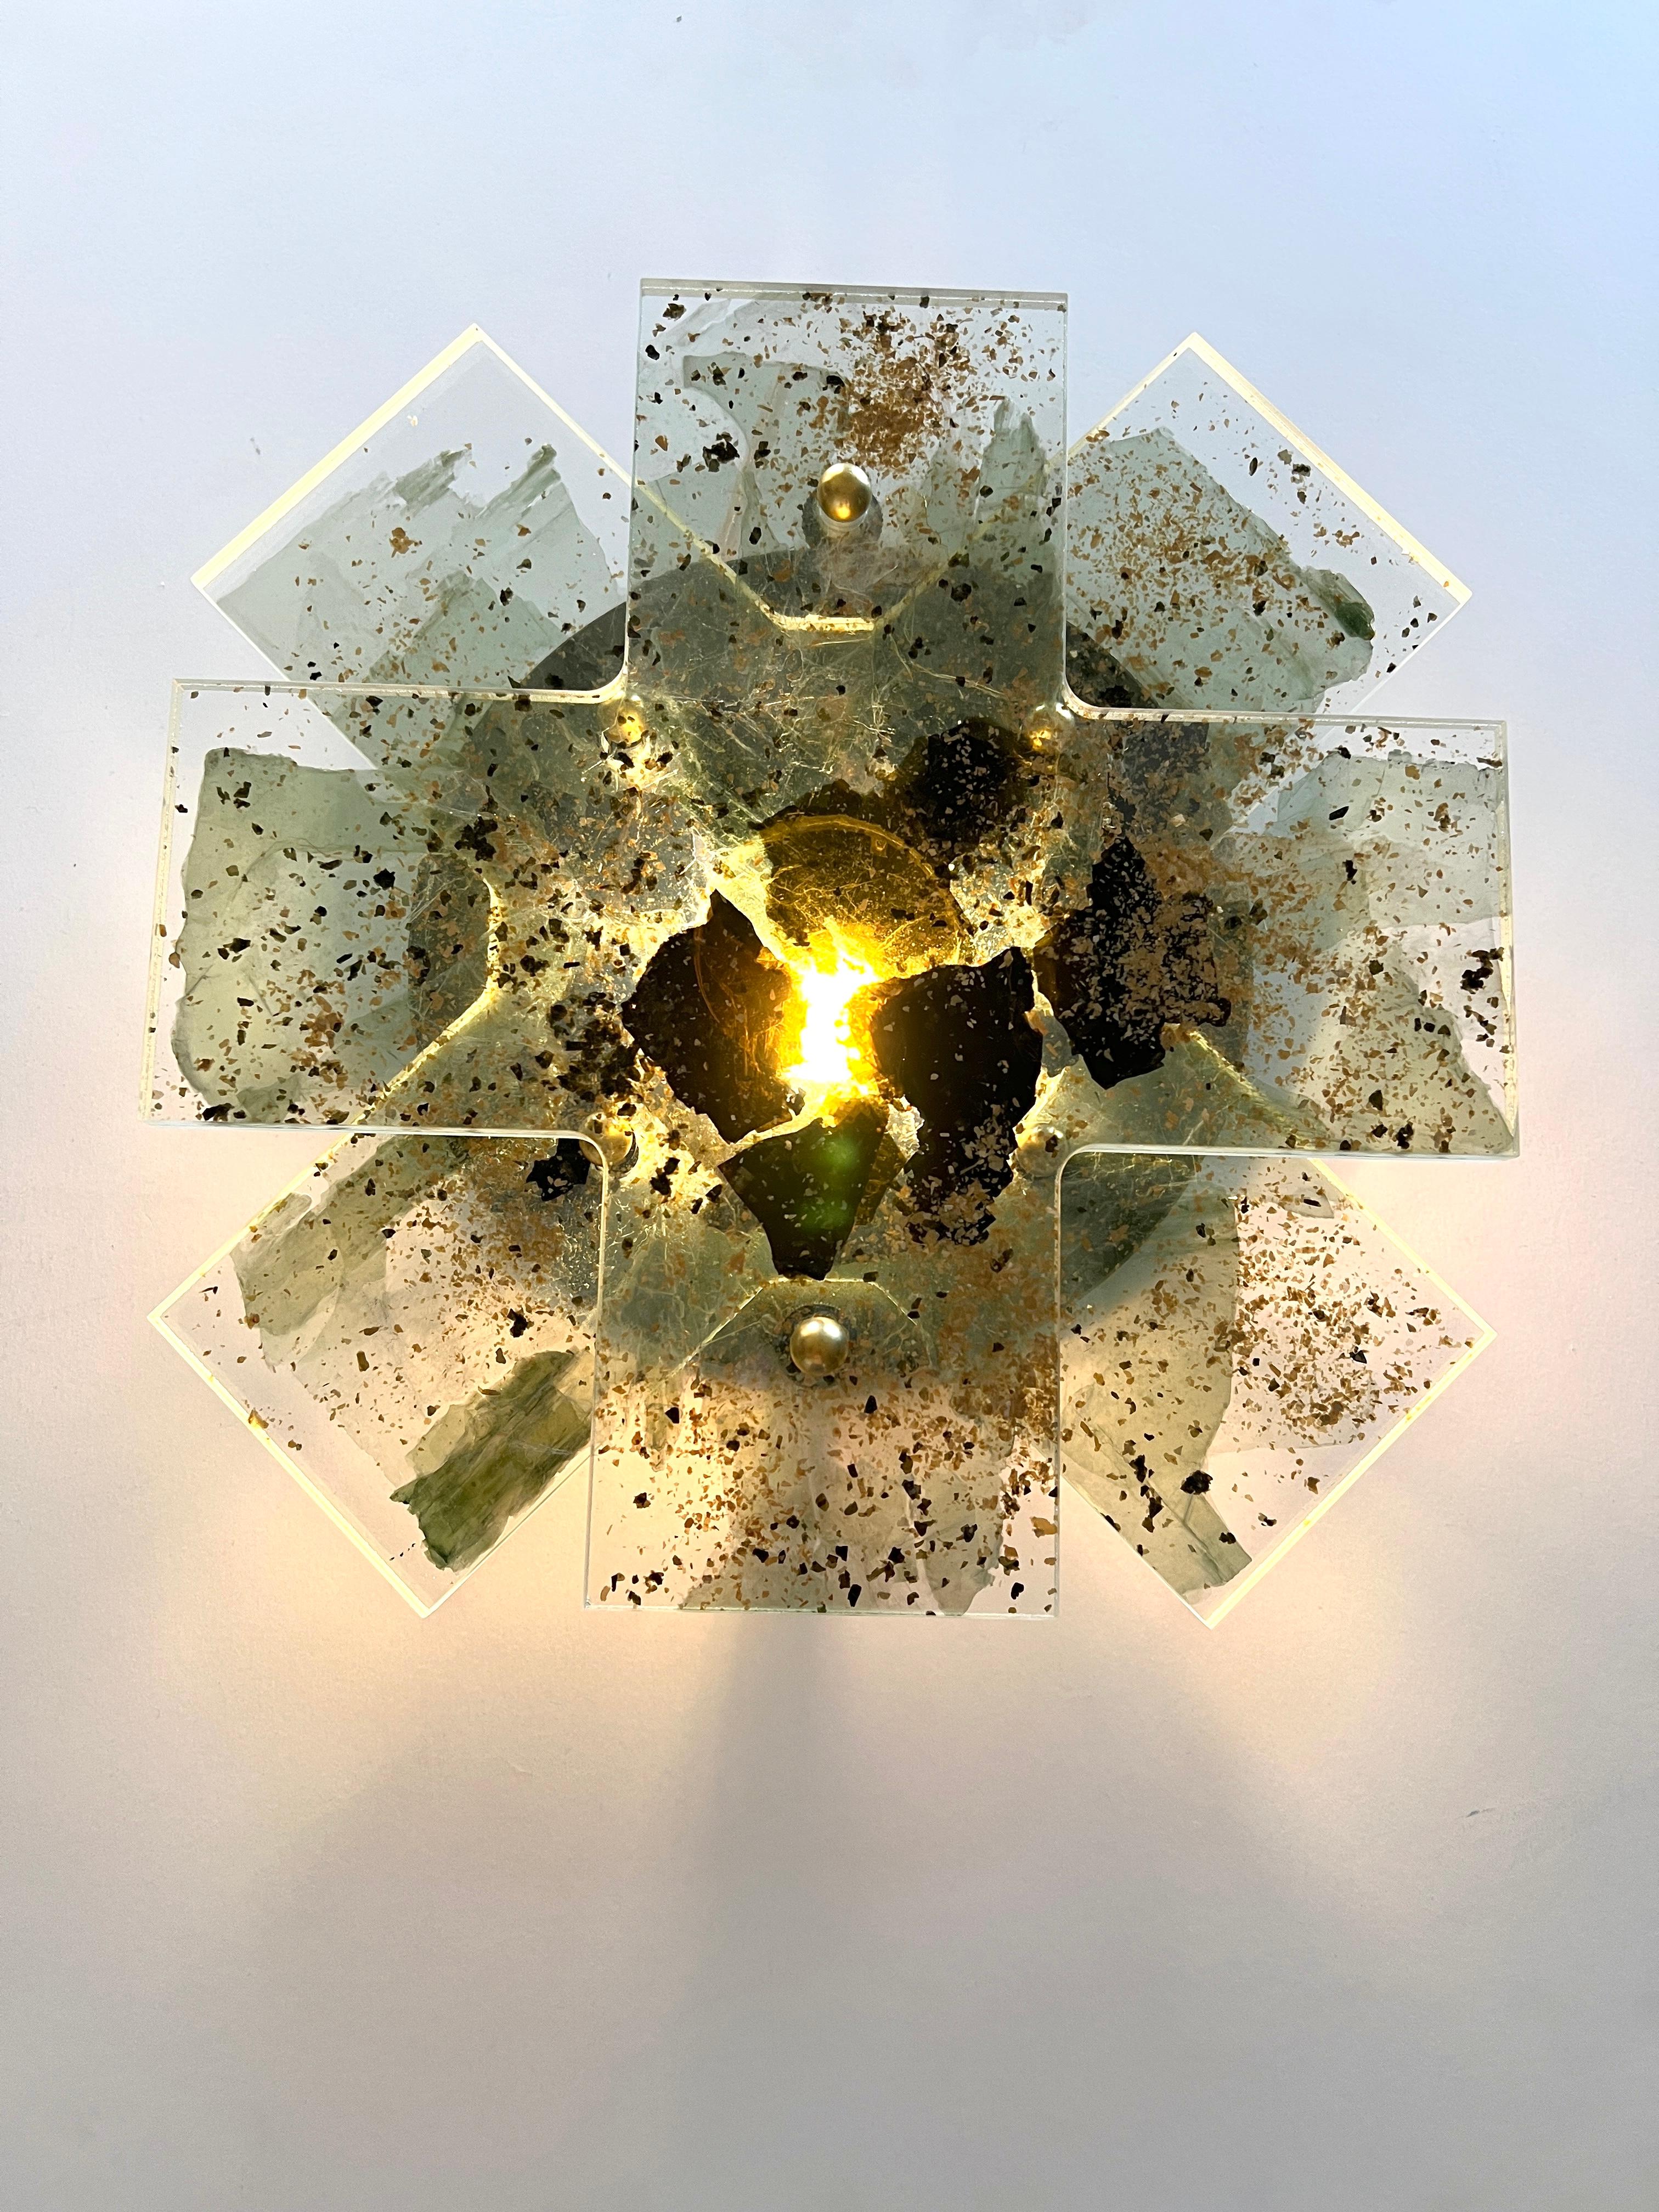 INTERMICA (NIMBUS LIGHT #1)
WALL SCONCE, 2023

InterMica® laminated Starphire glass with green, gold & black mica flakes, LED bulb 14 x 14 x 2.75 in.

InterMica is an architectural specialty glass product, crafted from carefully selected flakes of